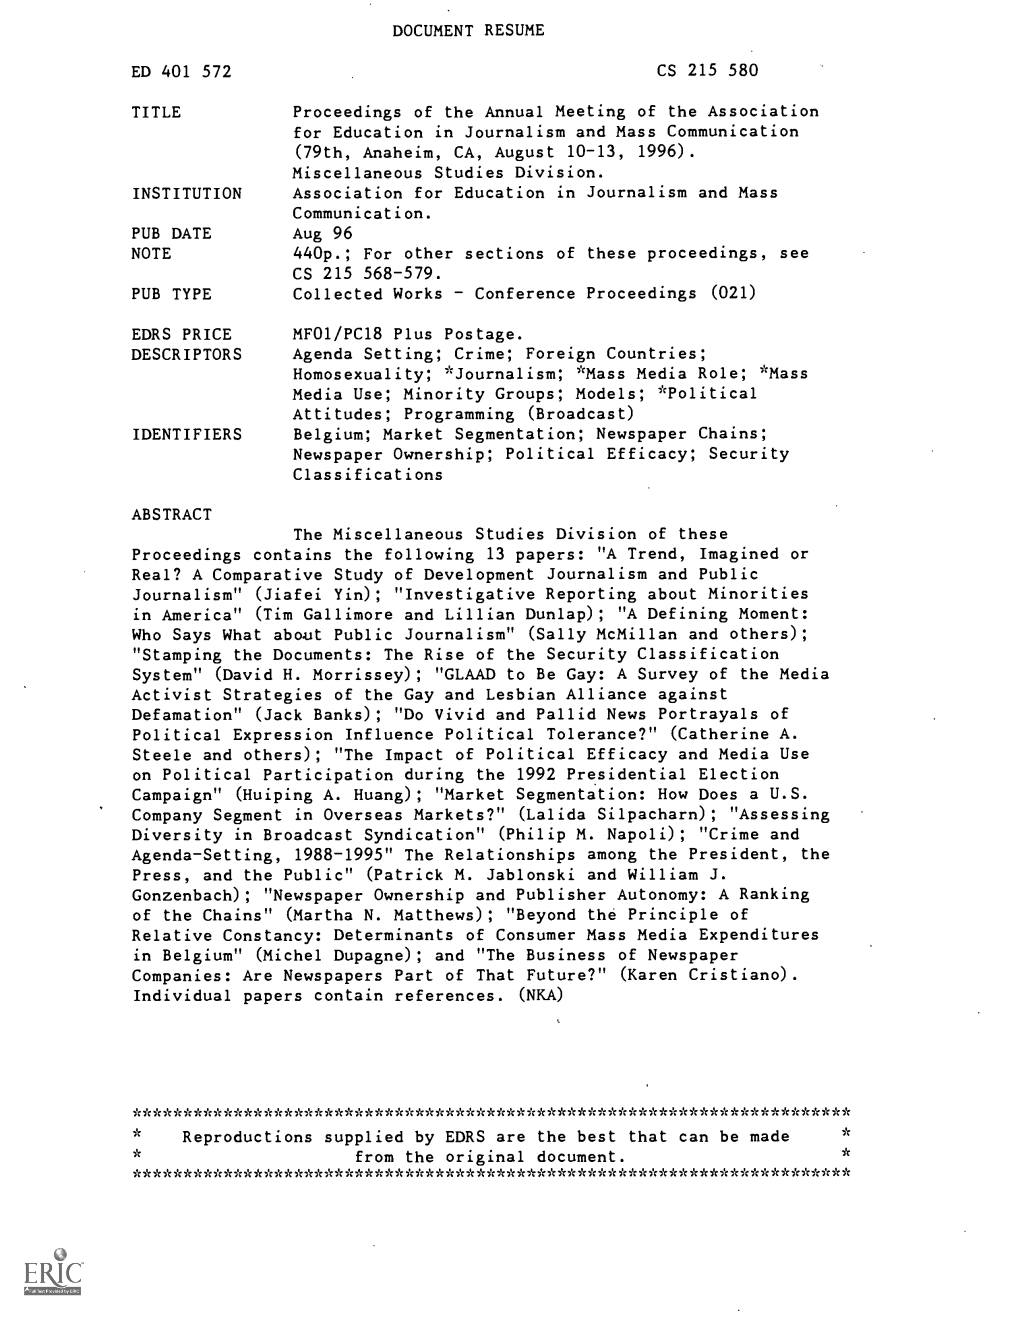 TITLE Proceedings of the Annual Meeting of the Association for Education in Journalism and Mass Communication (79Th, Anaheim, CA, August 10-13, 1996)